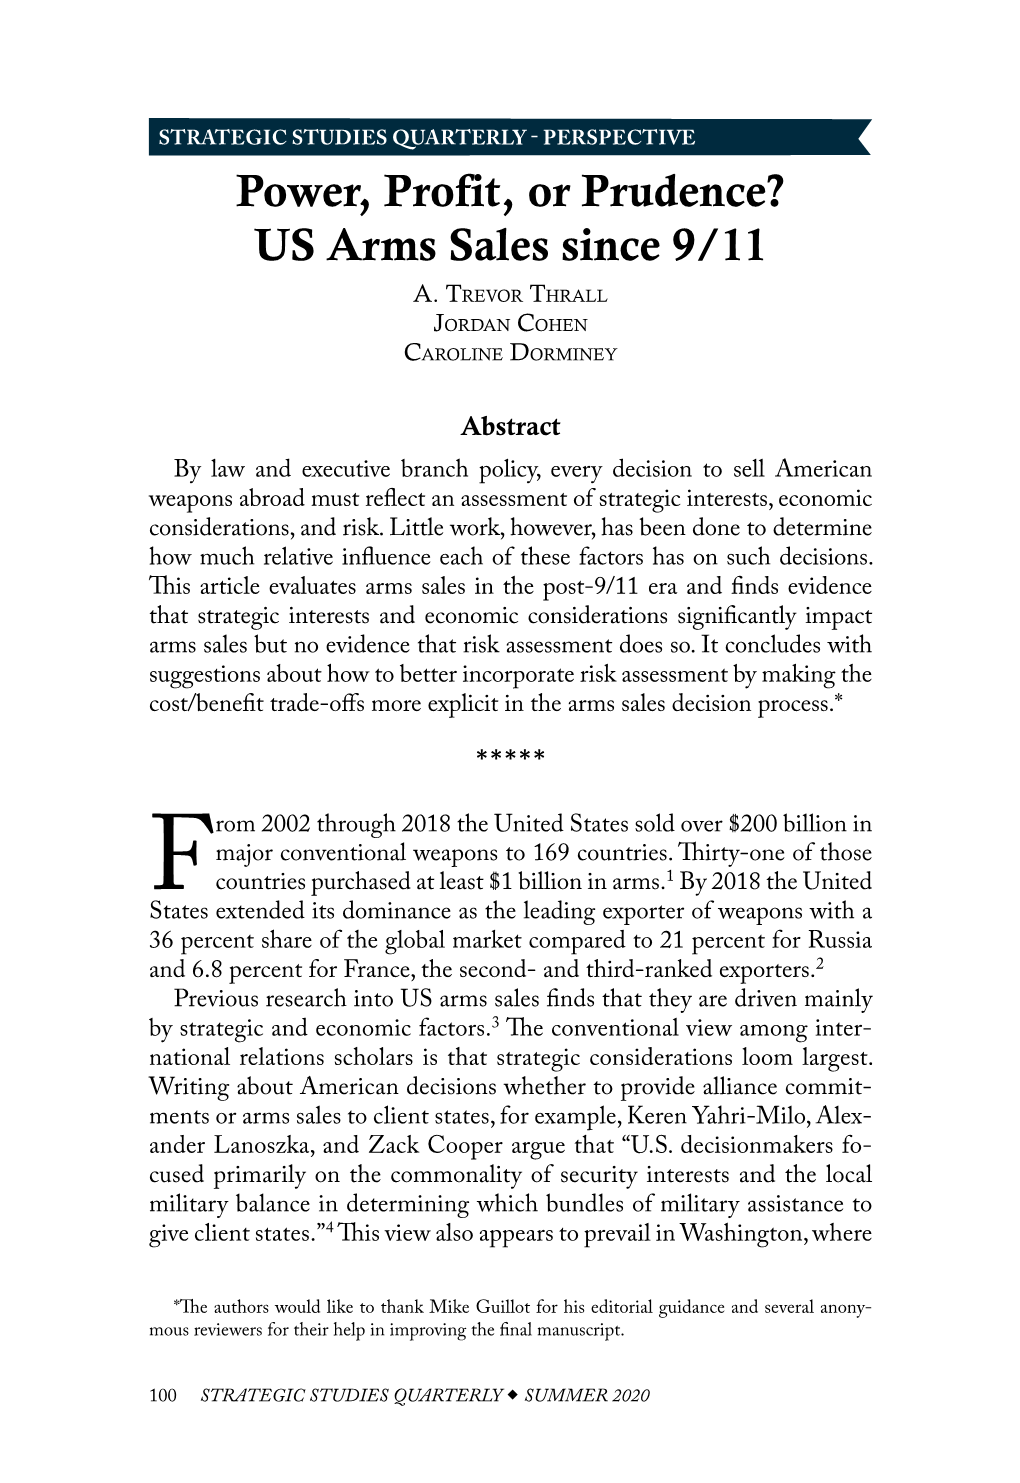 Power, Profit, Or Prudence? US Arms Sales Since 9/11 A